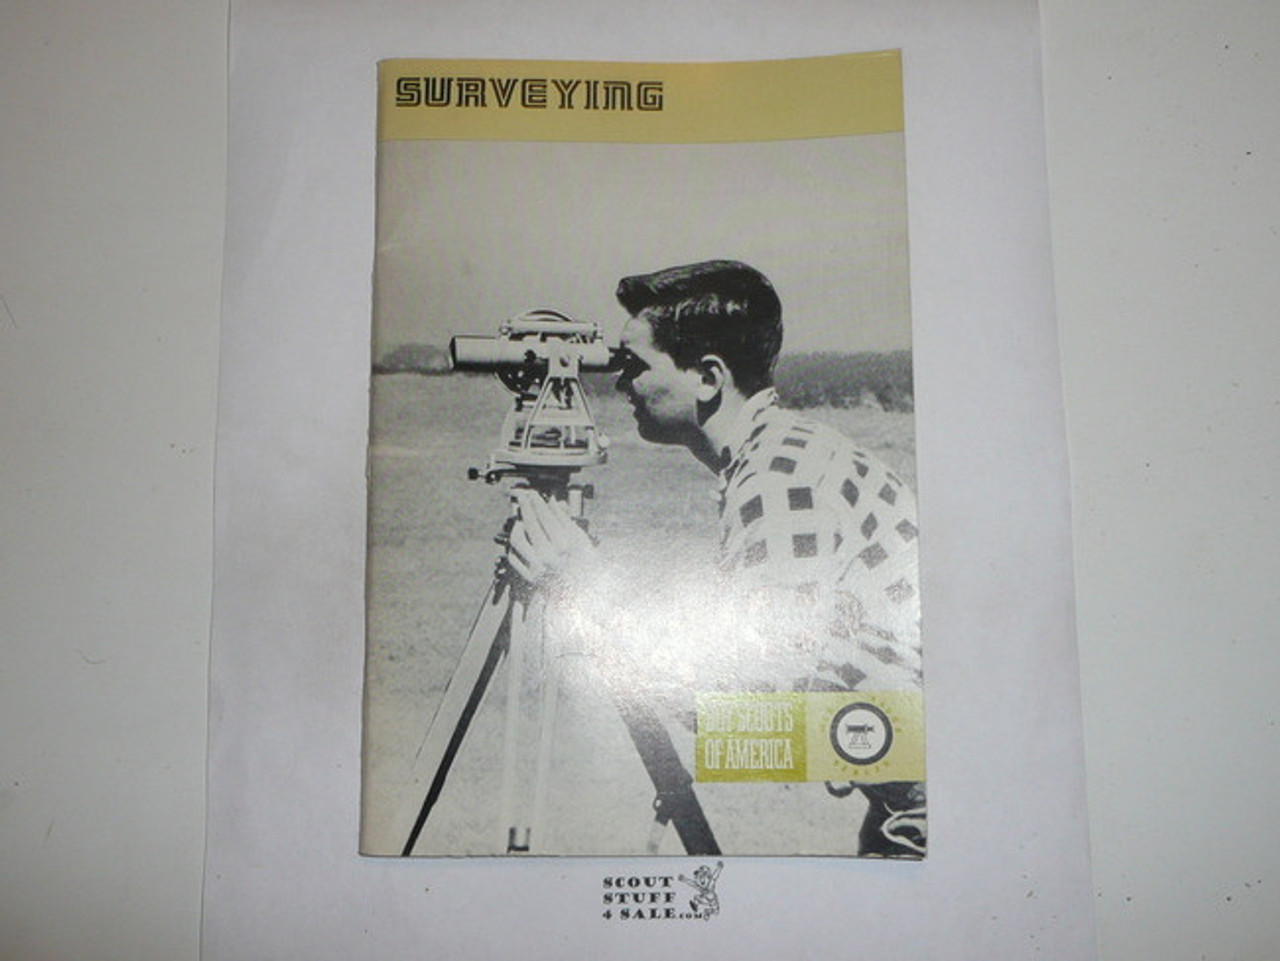 Surveying Merit Badge Pamphlet, Type 8, Green Band Cover, 6-76 Printing